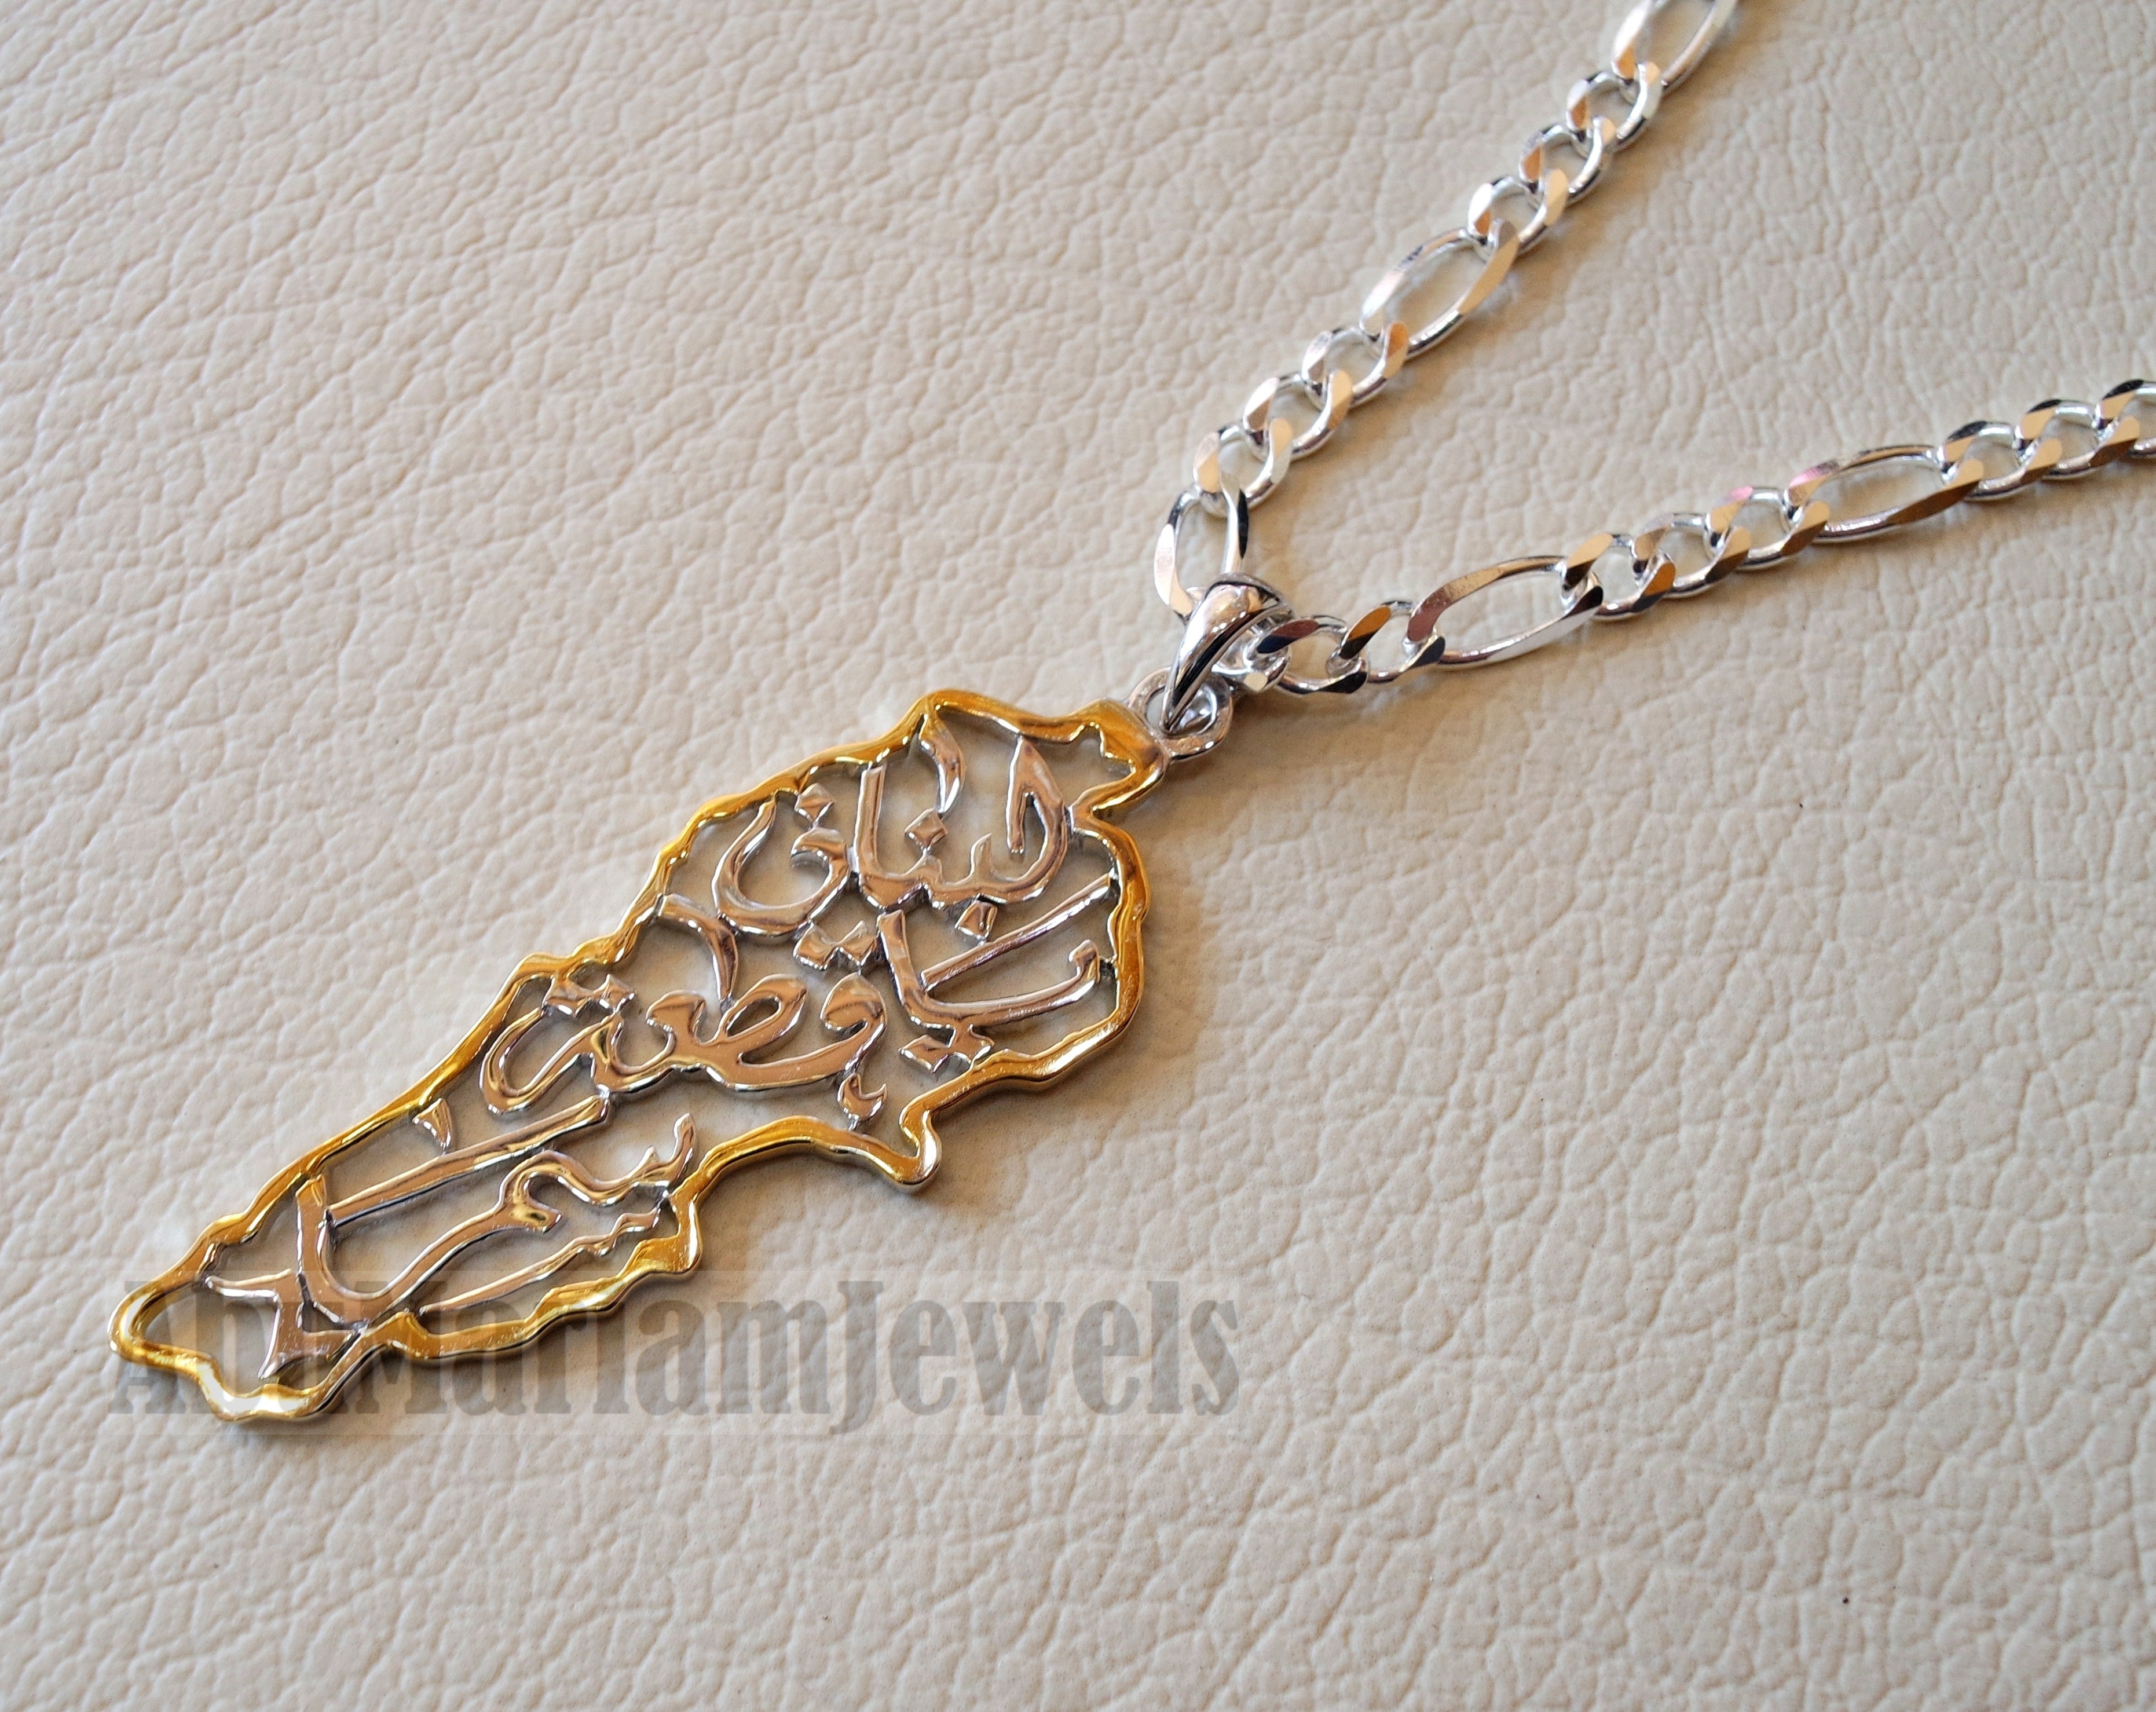 Lebanon map necklace thick chain with famous calligraphy sterling silver 925 high quality 14k gold plating jewelry arabic , خريطة لبنان